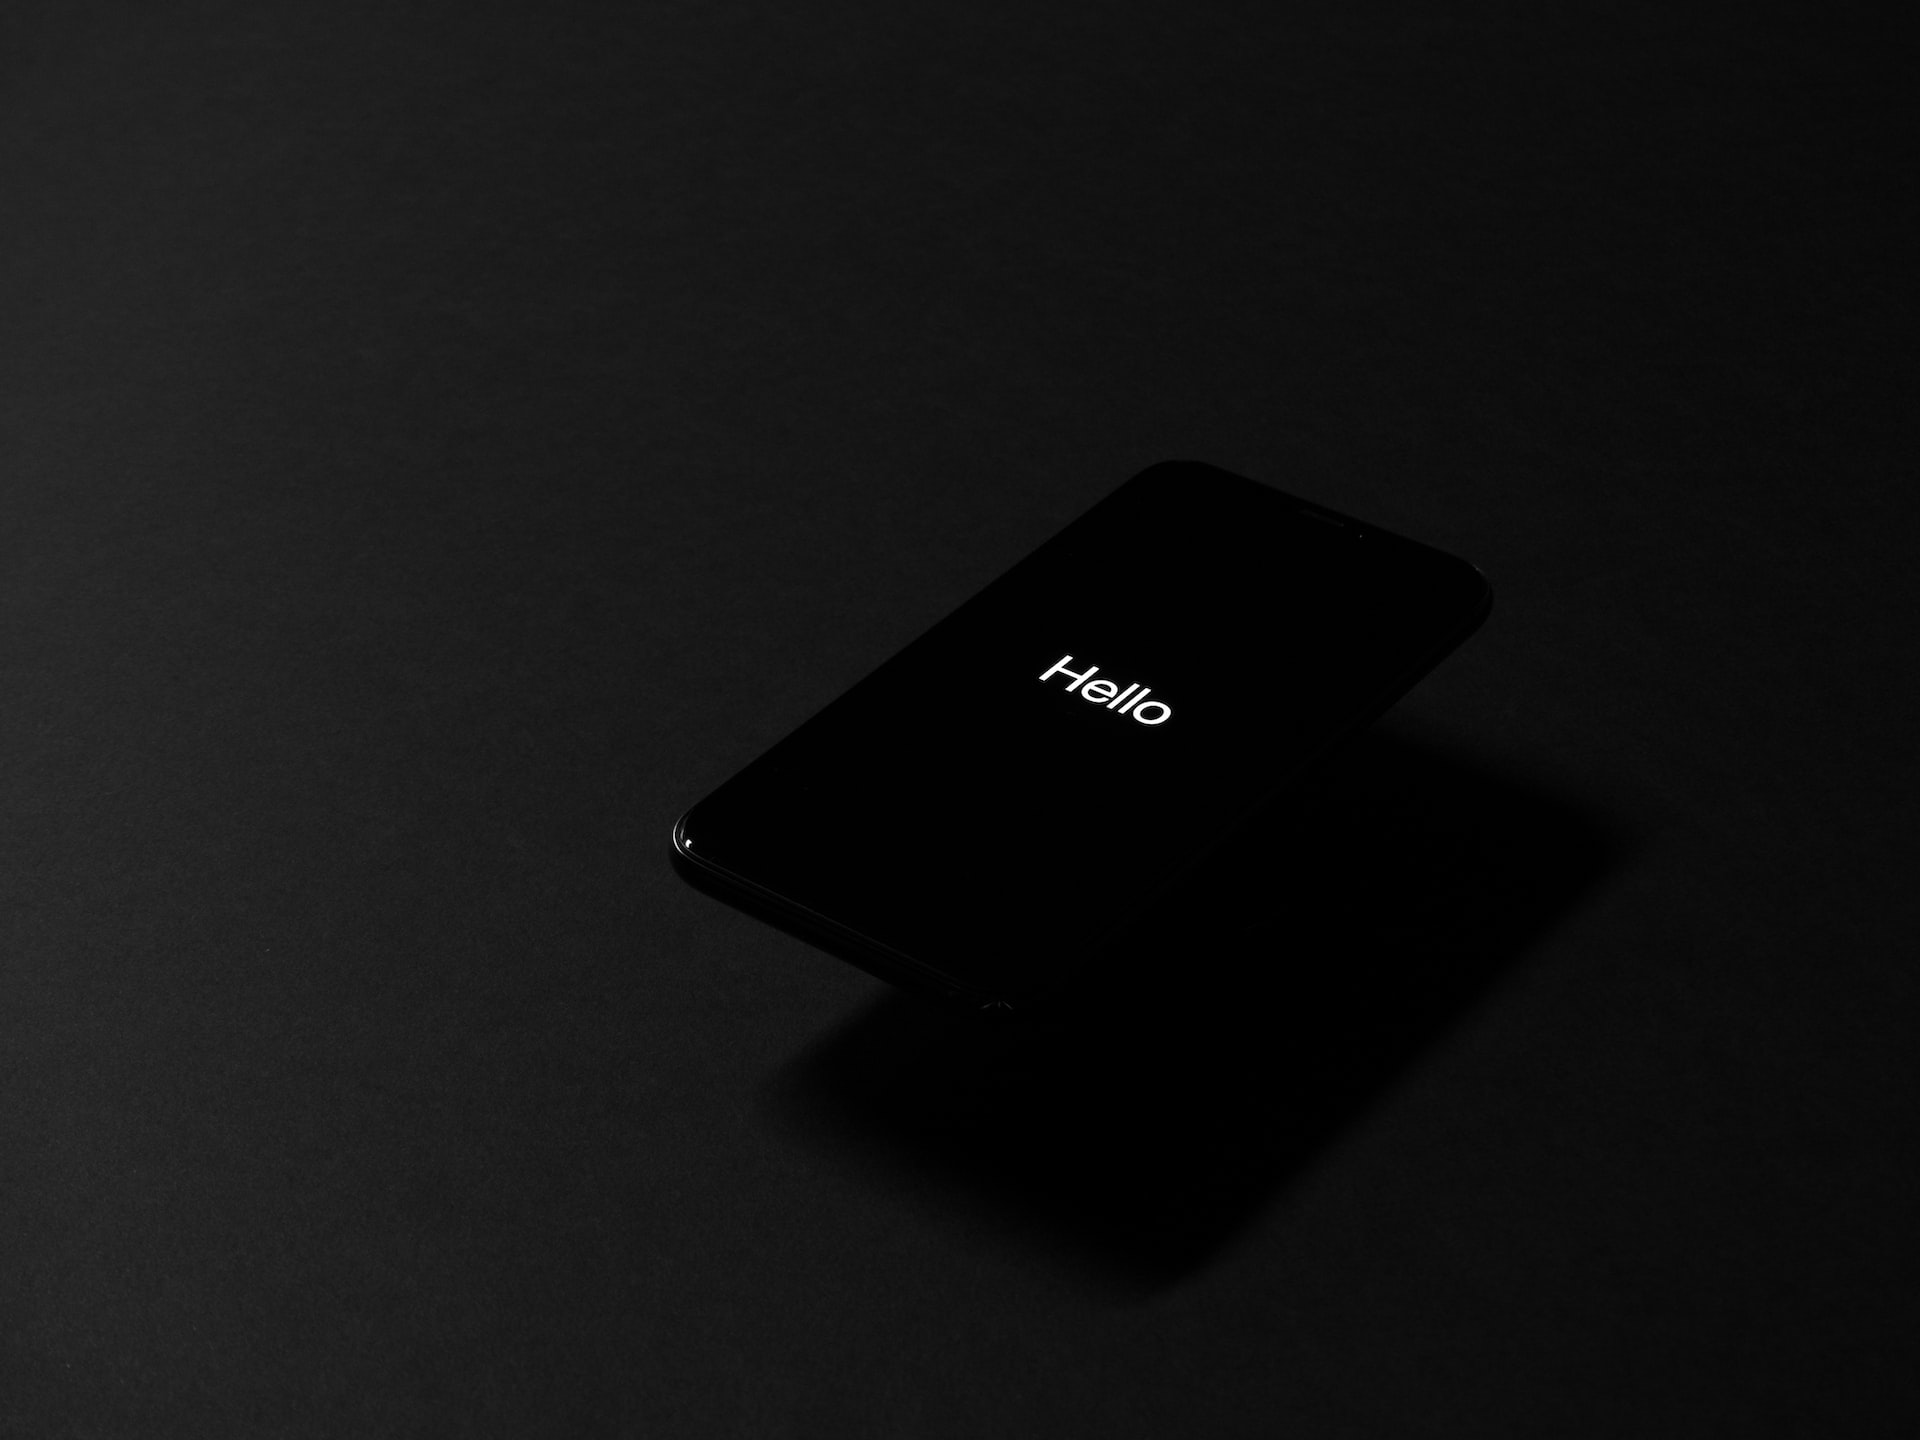 A smartphone with the word Hello on the screen on a dark background